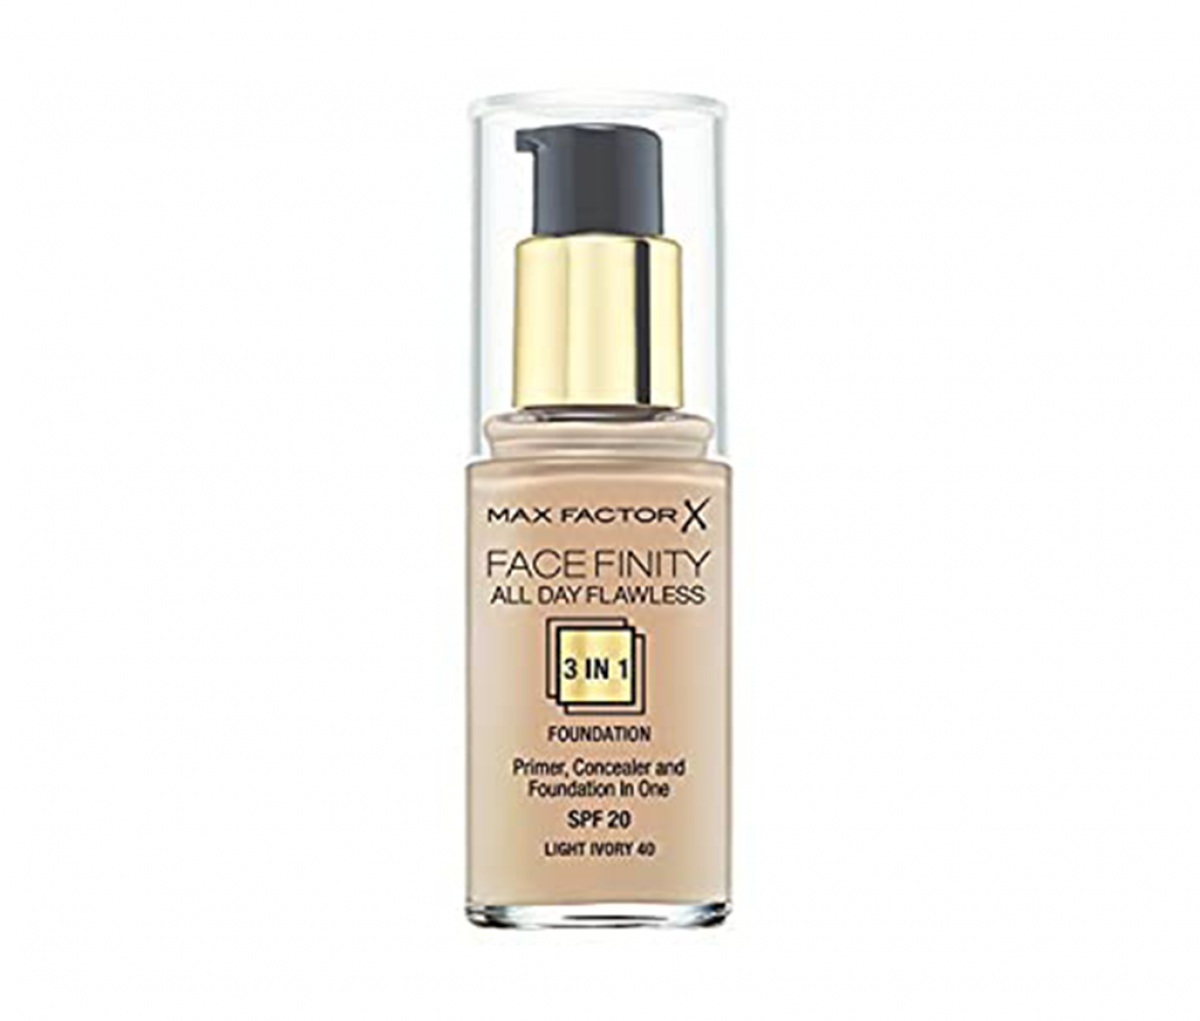 Max Factor 3in1 Face Finity 40 Light Ivory Foundation